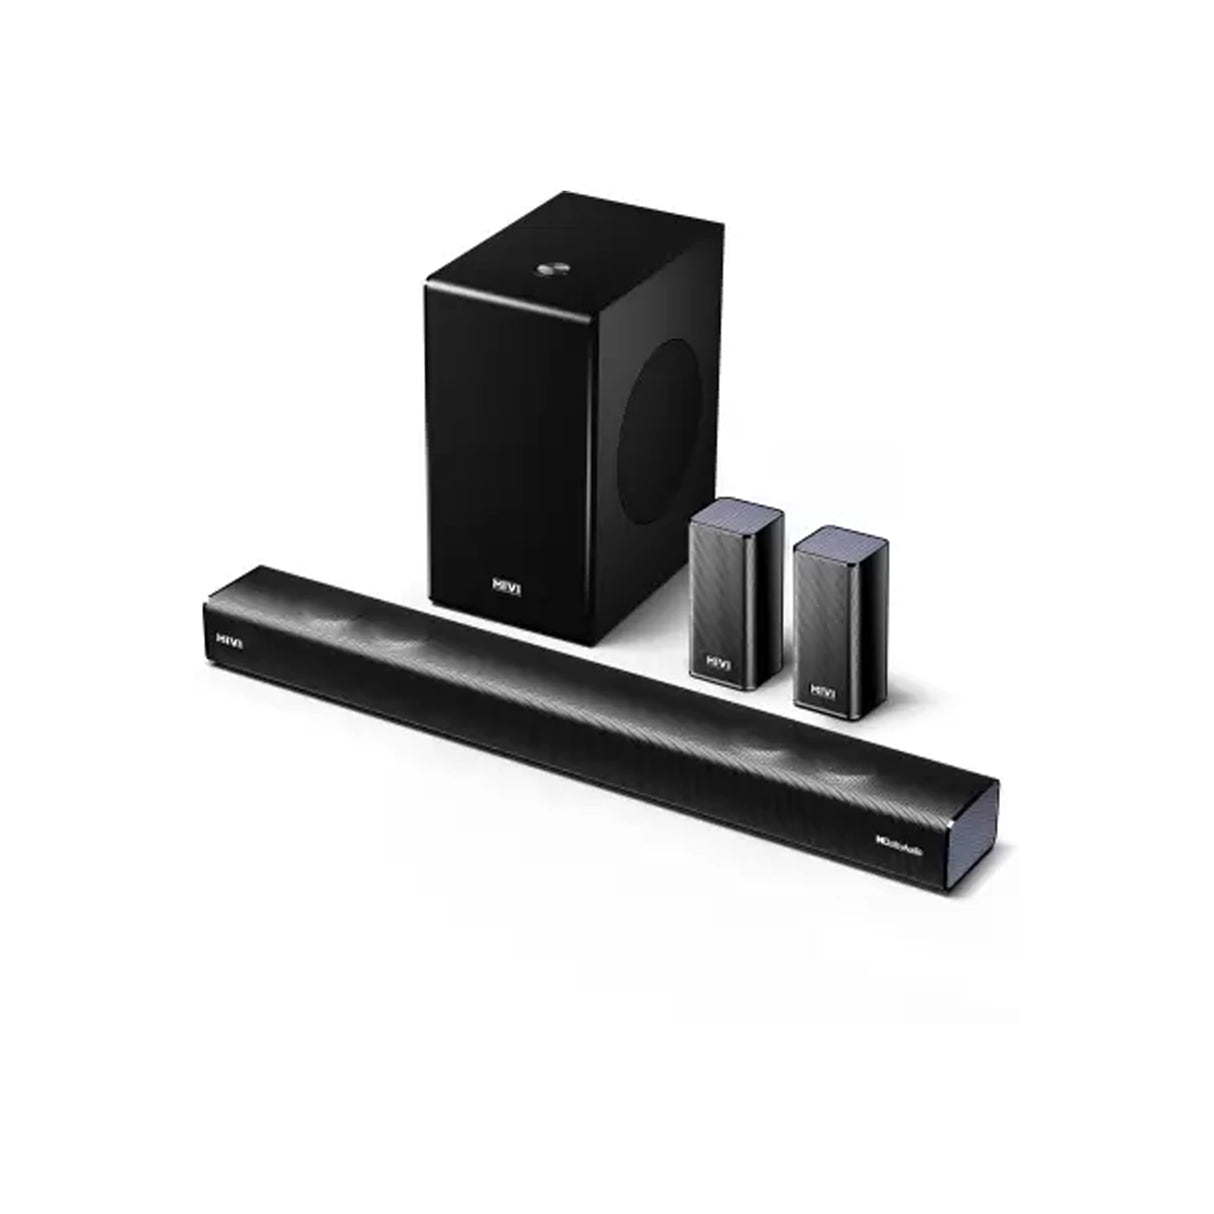 Mivi Fort S660 5.1 Channel Cinematic Soundbar With Subwoofer and 2 Satellite Speakers (660 Watts)